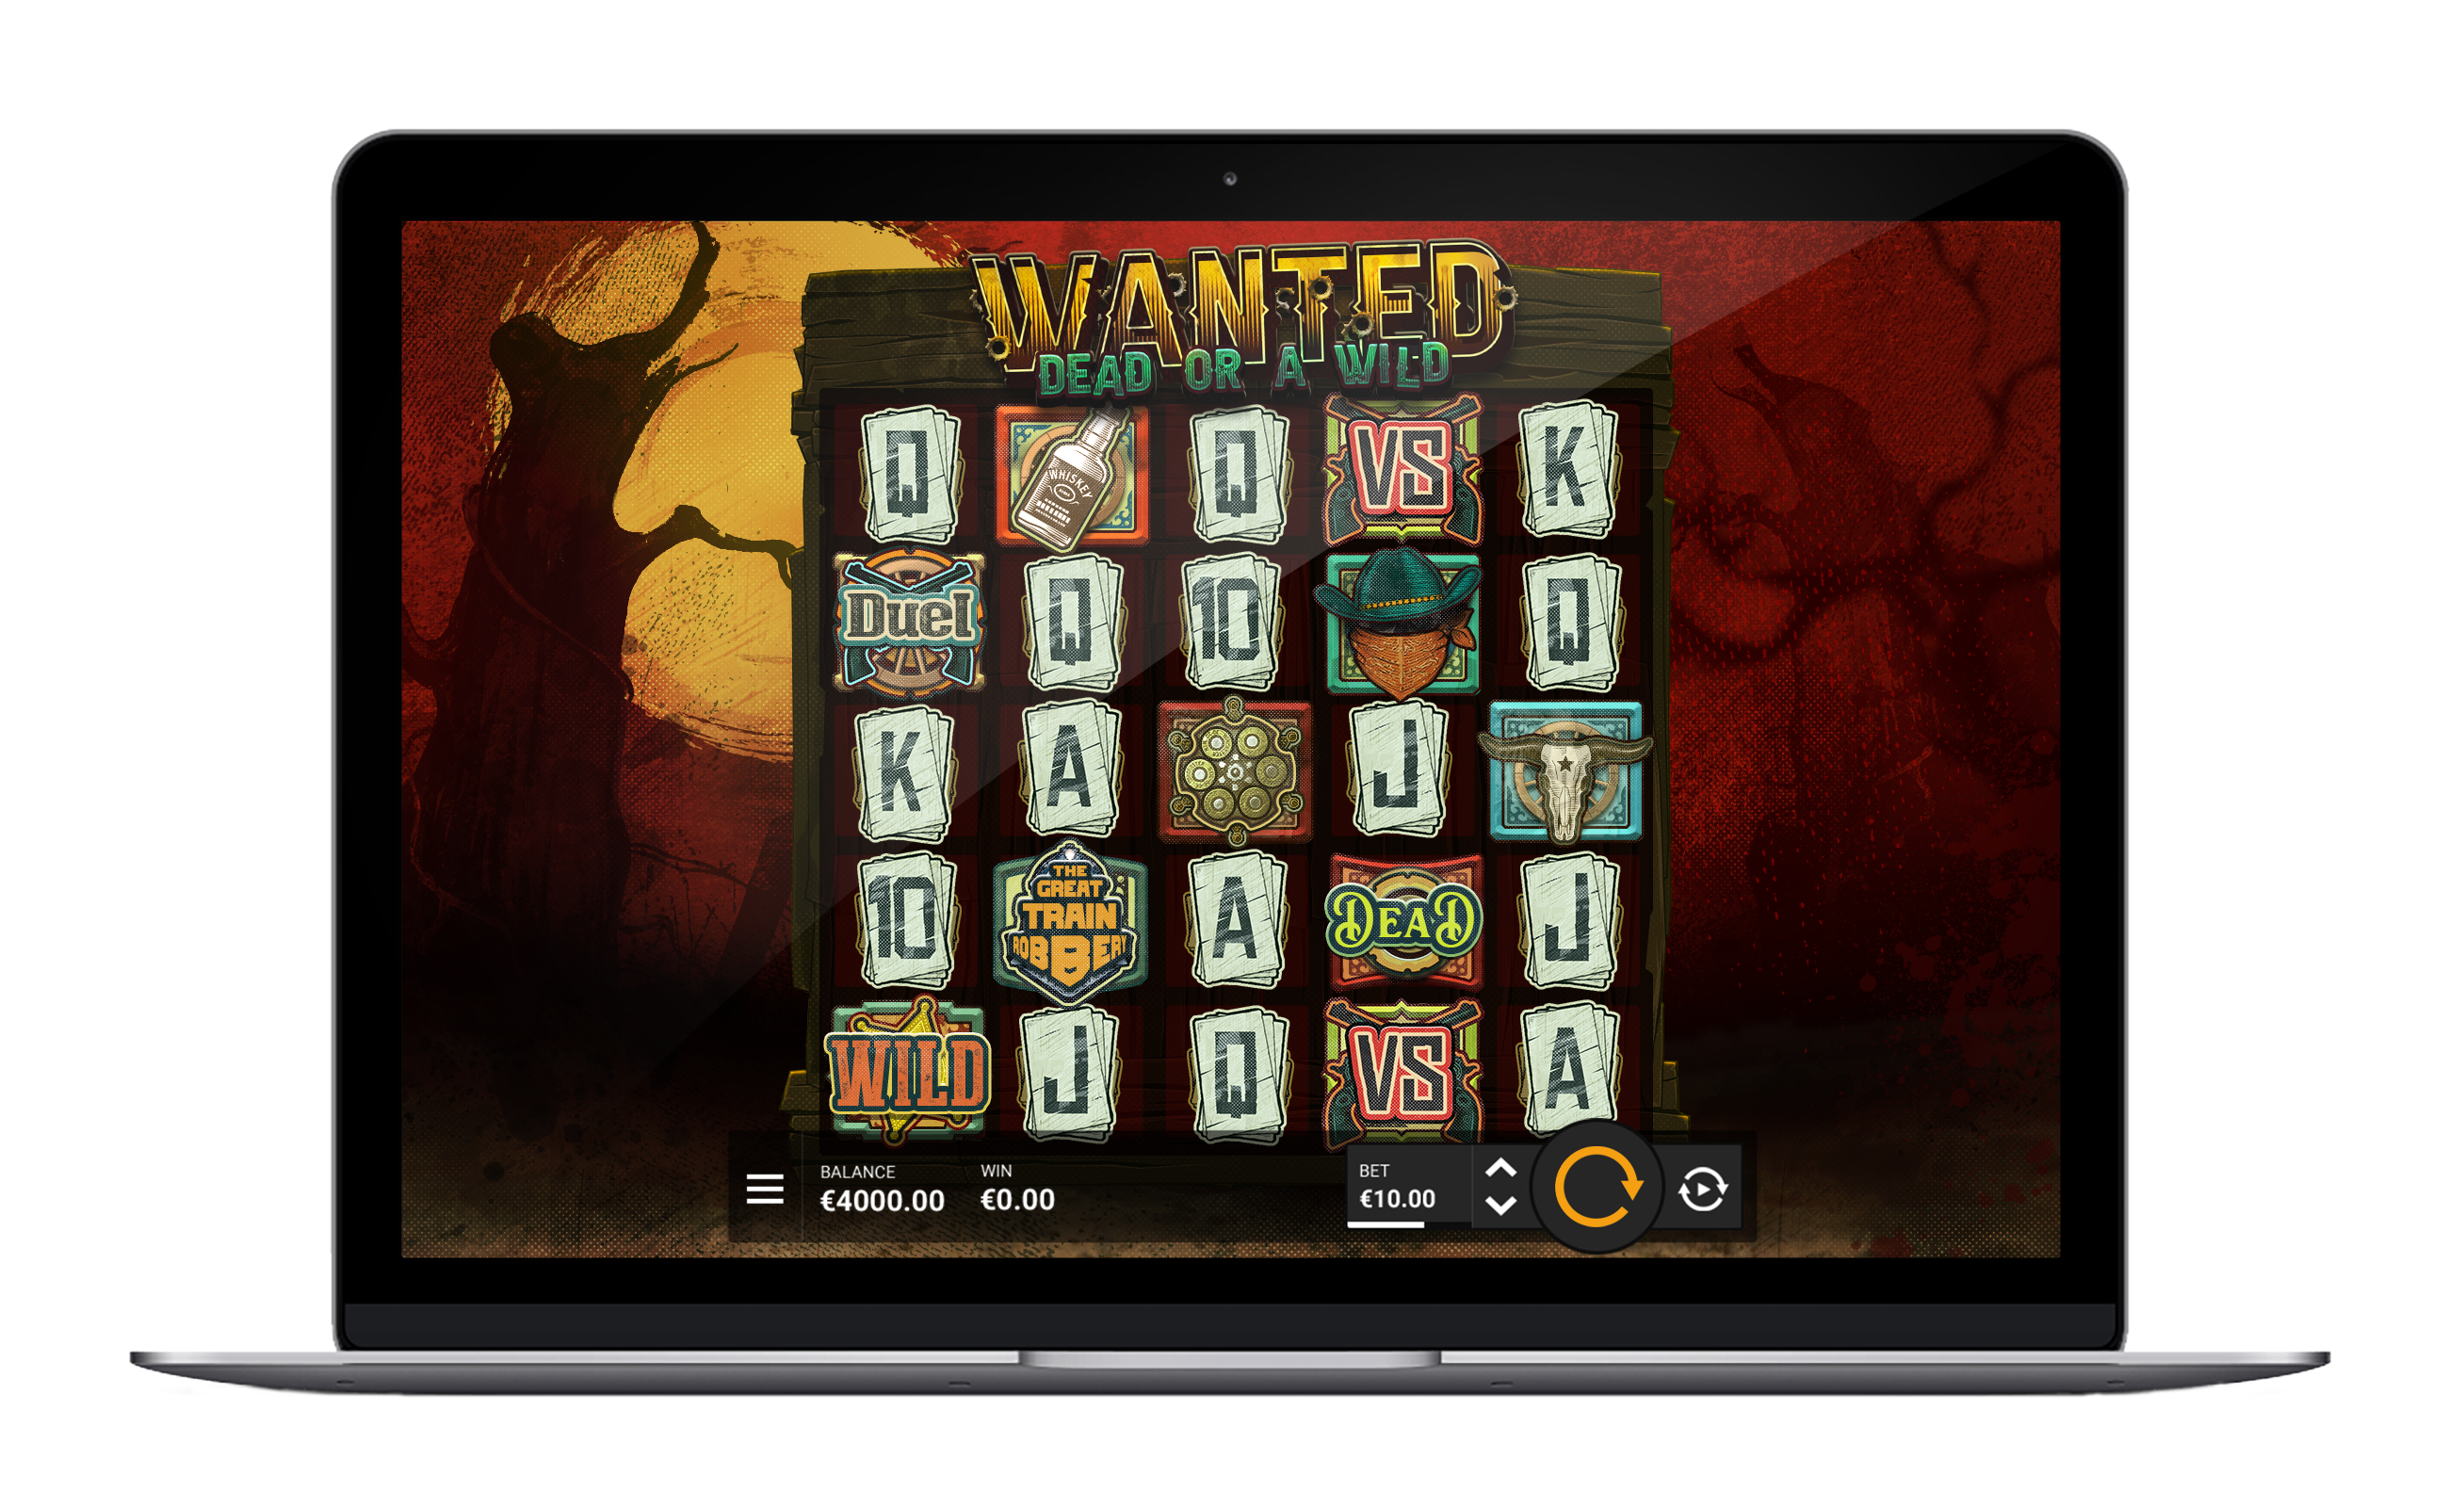 Wanted Dead or a wild slot screen